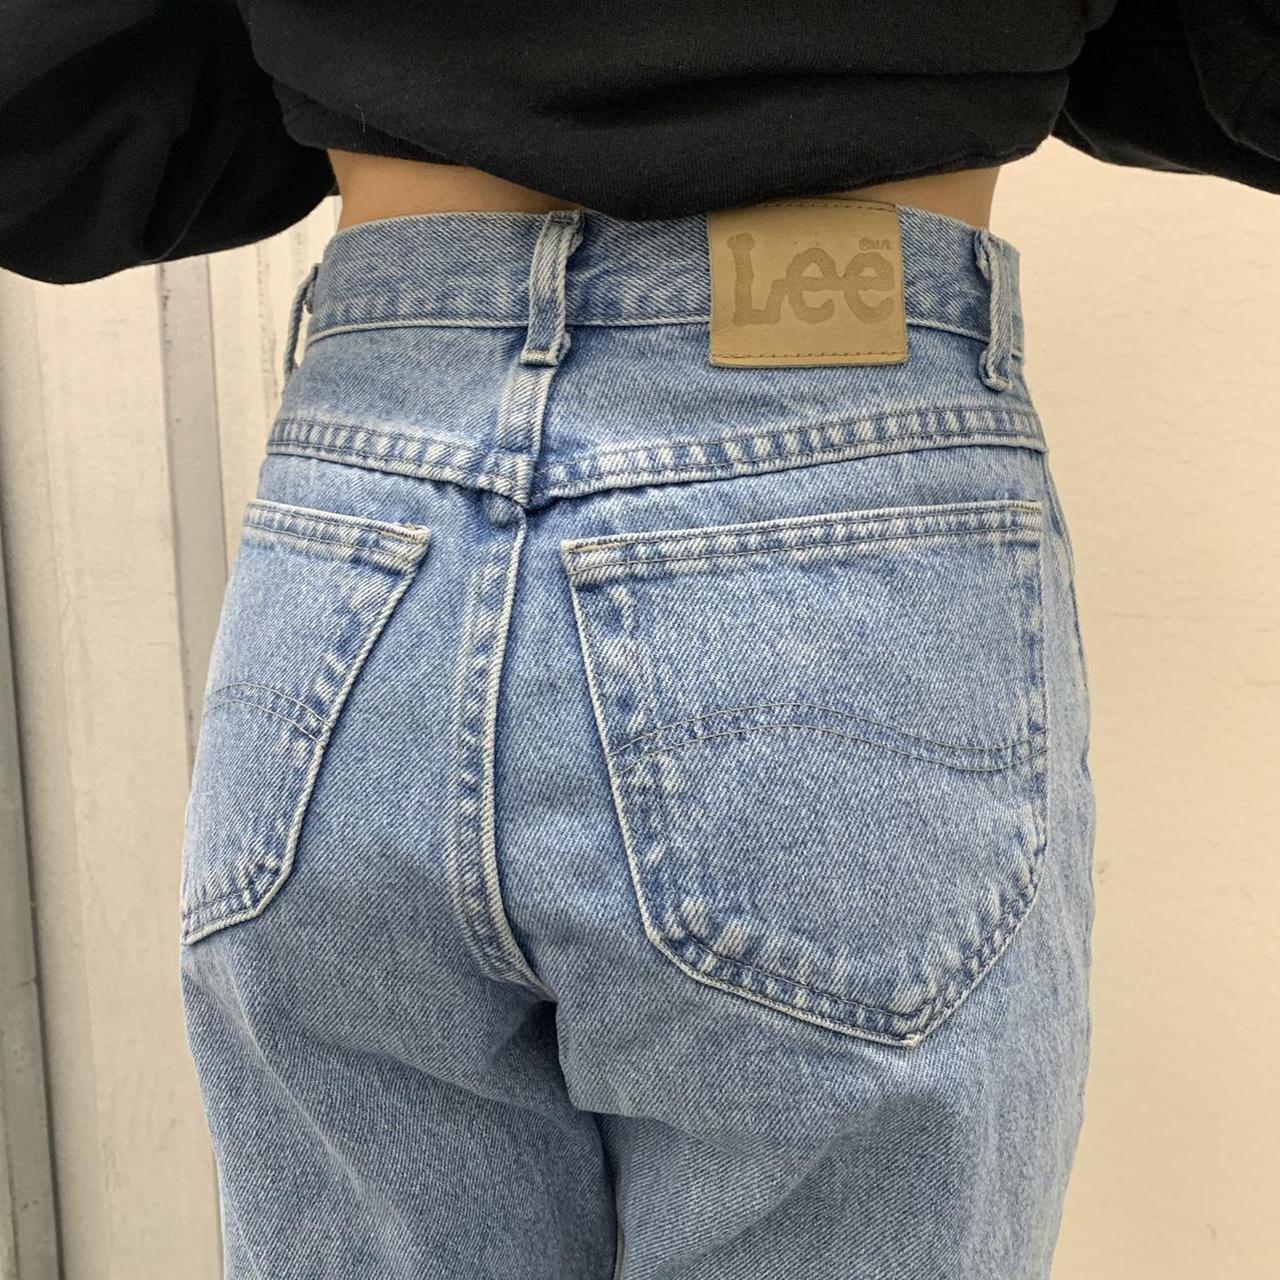 Vintage Lee mom jeans in blue. From the 90s. Womens... - Depop